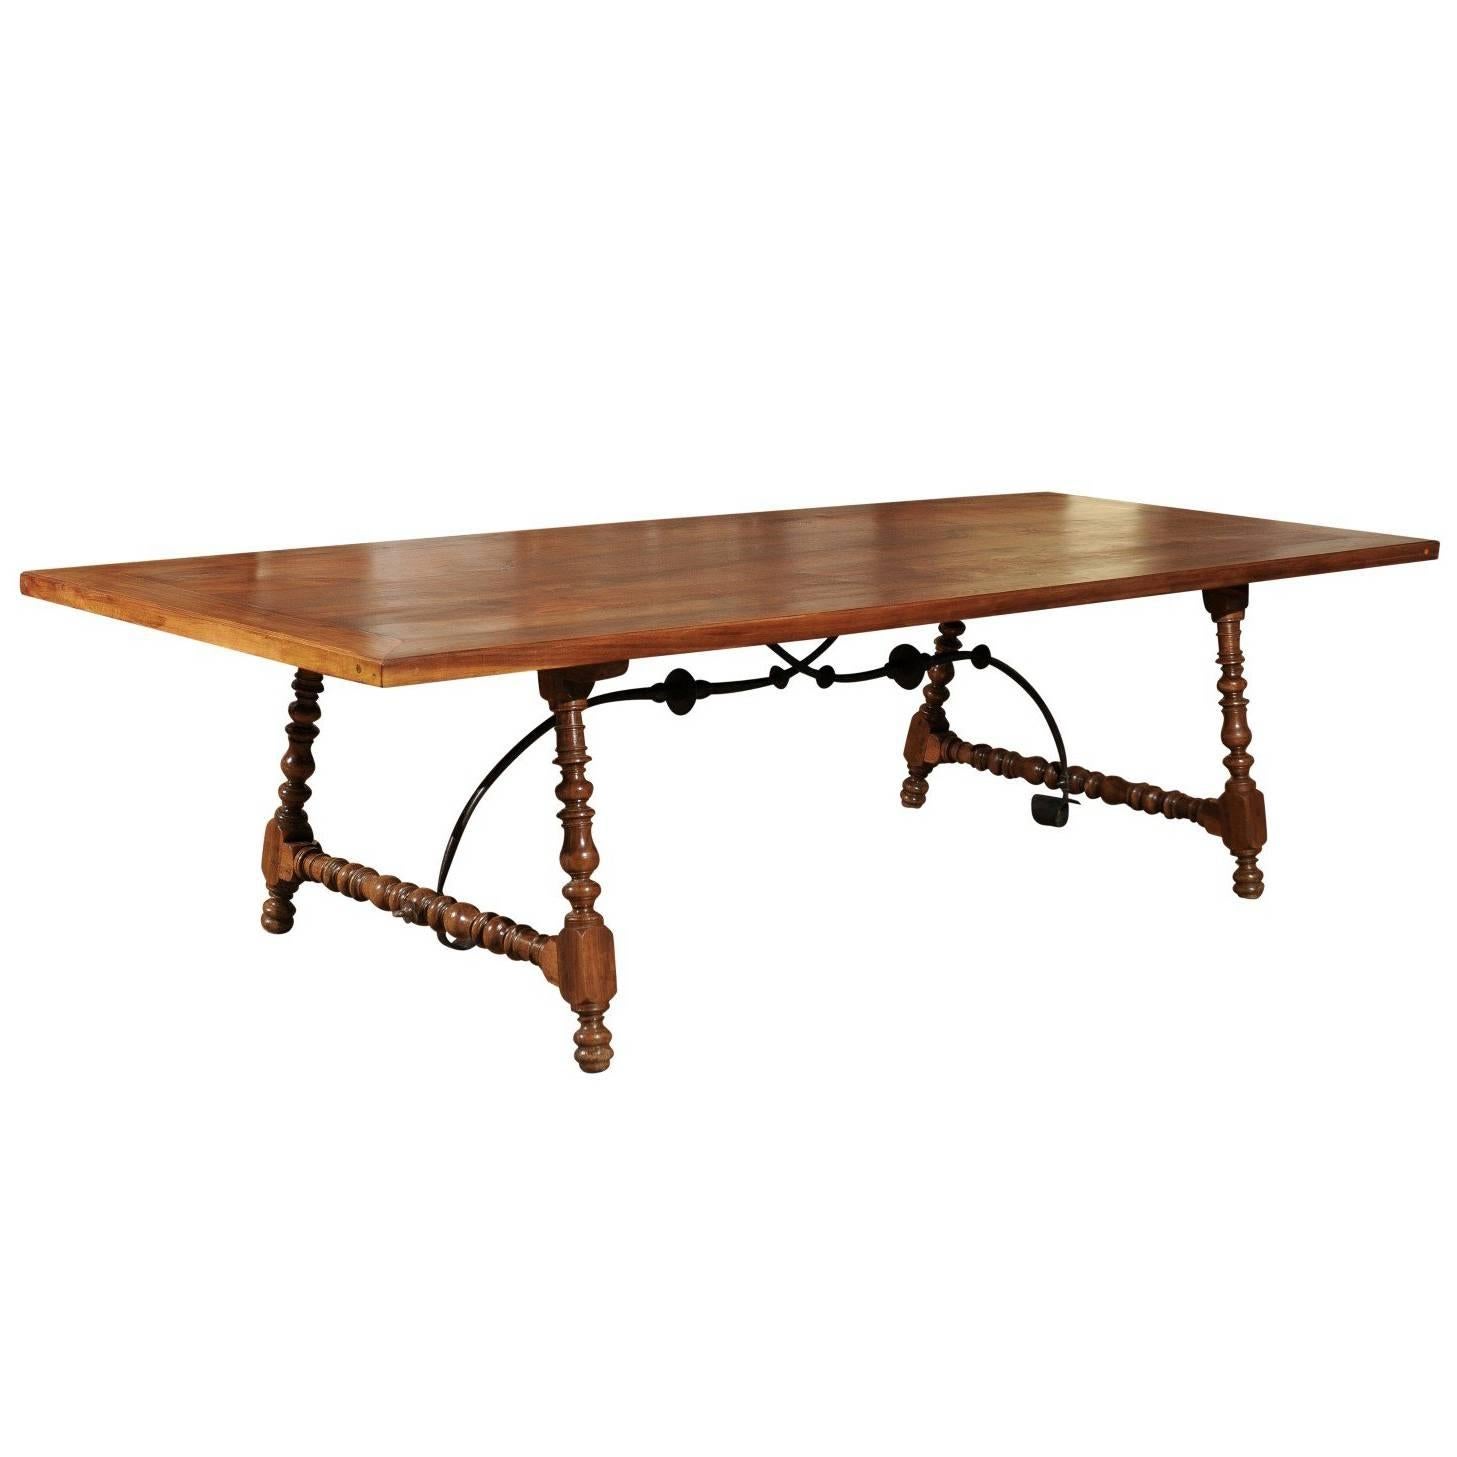 Spanish 18th Century Walnut Fratino Table with Turned Legs and Iron Stretcher